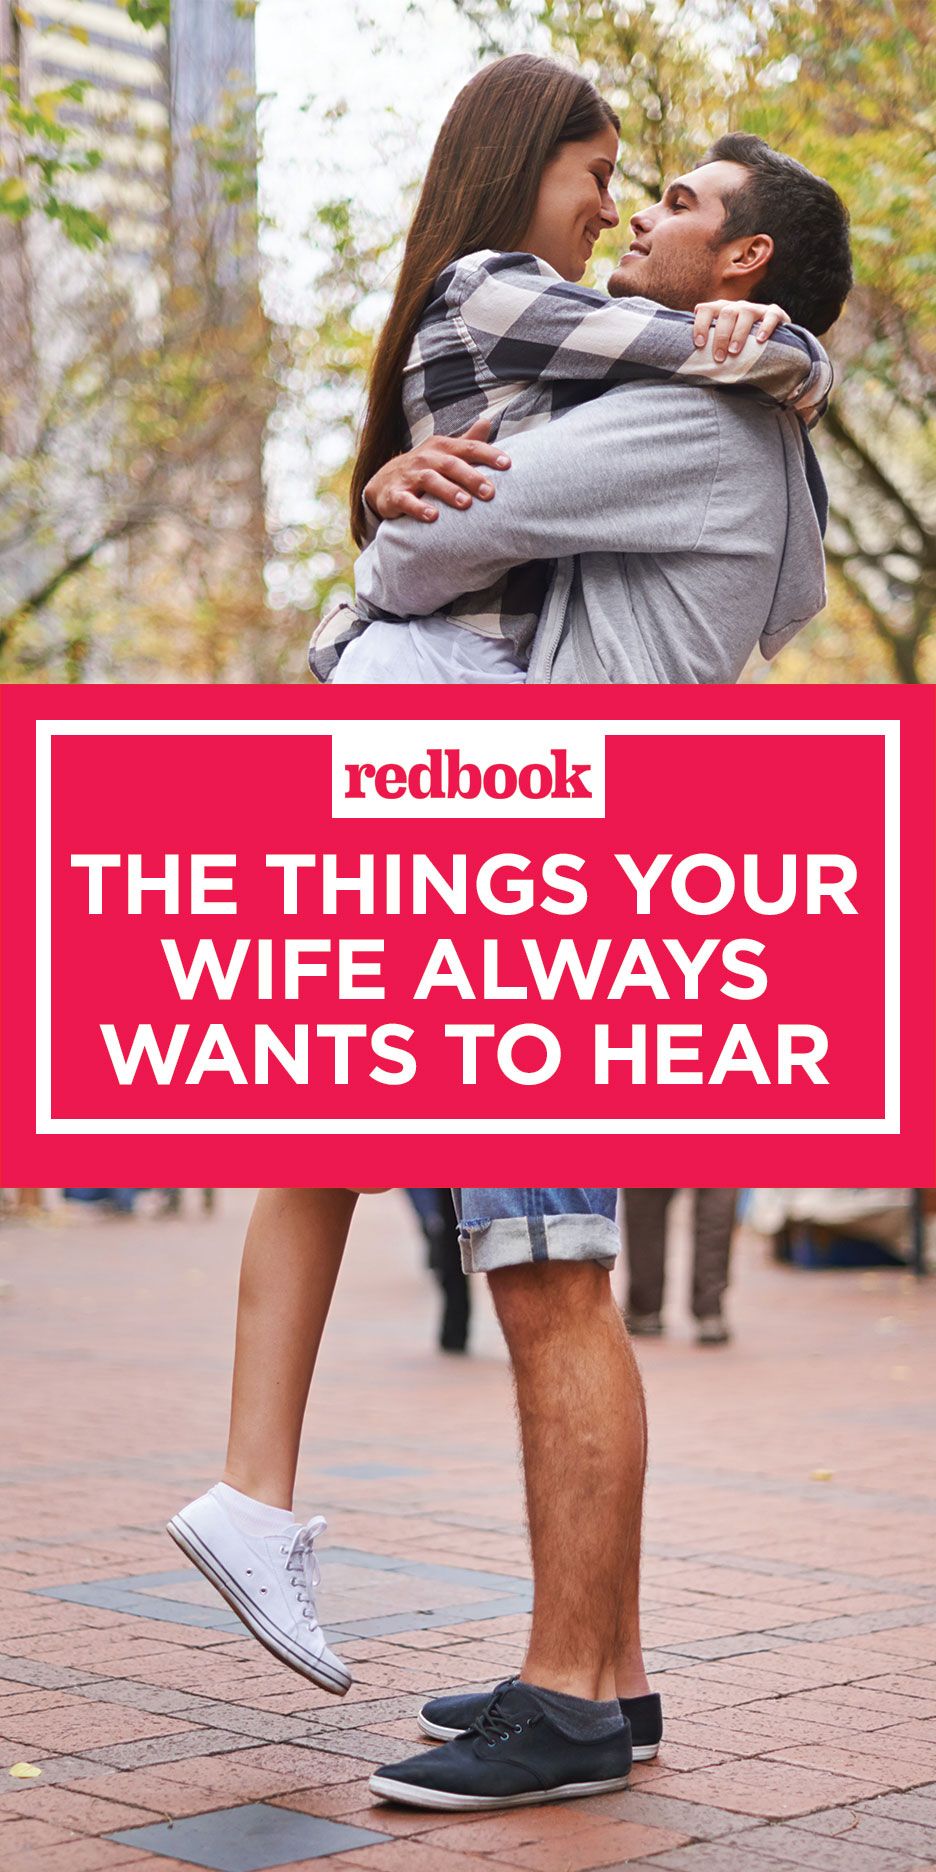 35 Things Your Wife Wants to Hear - What Husbands Should Say to Wives